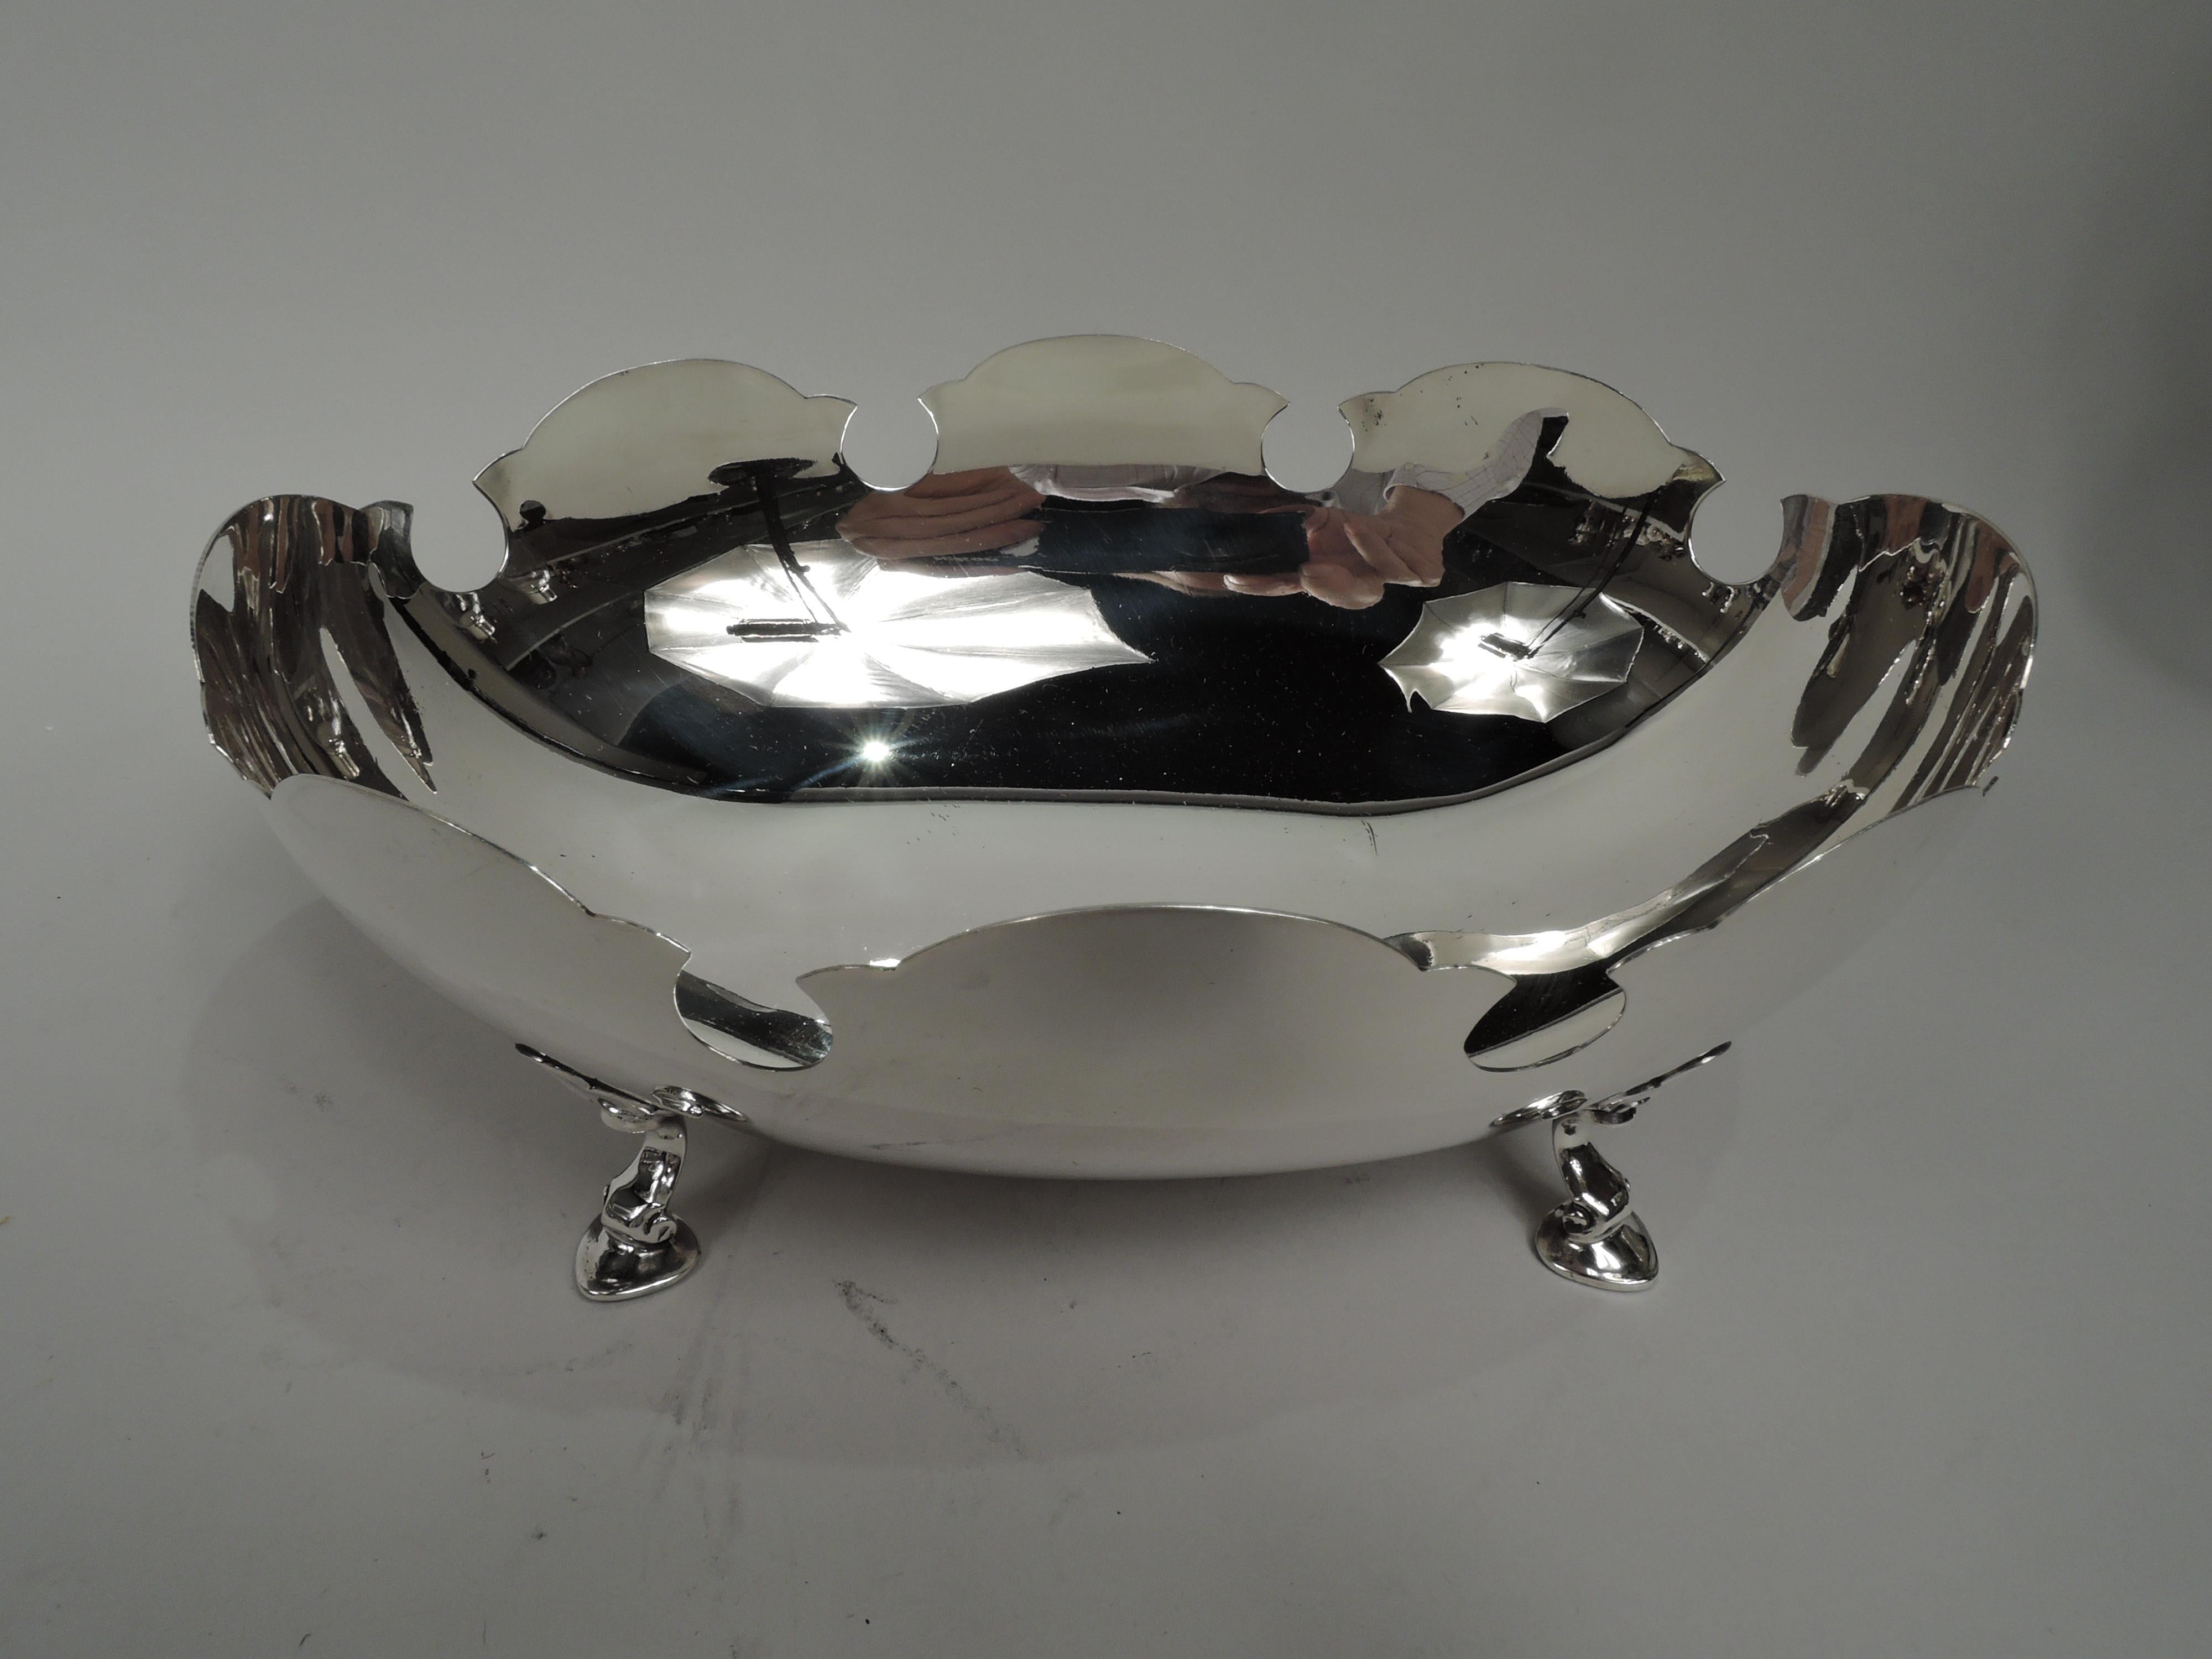 Mid-Century Modern sterling silver bowl. Made by Tiffany & Co. in New York. Ovoid with curved sides and 4 leaf-mounted volute-scroll hoof supports. Crisp and curved monteith-style rim with cutout circles. Fully marked including maker’s stamp and